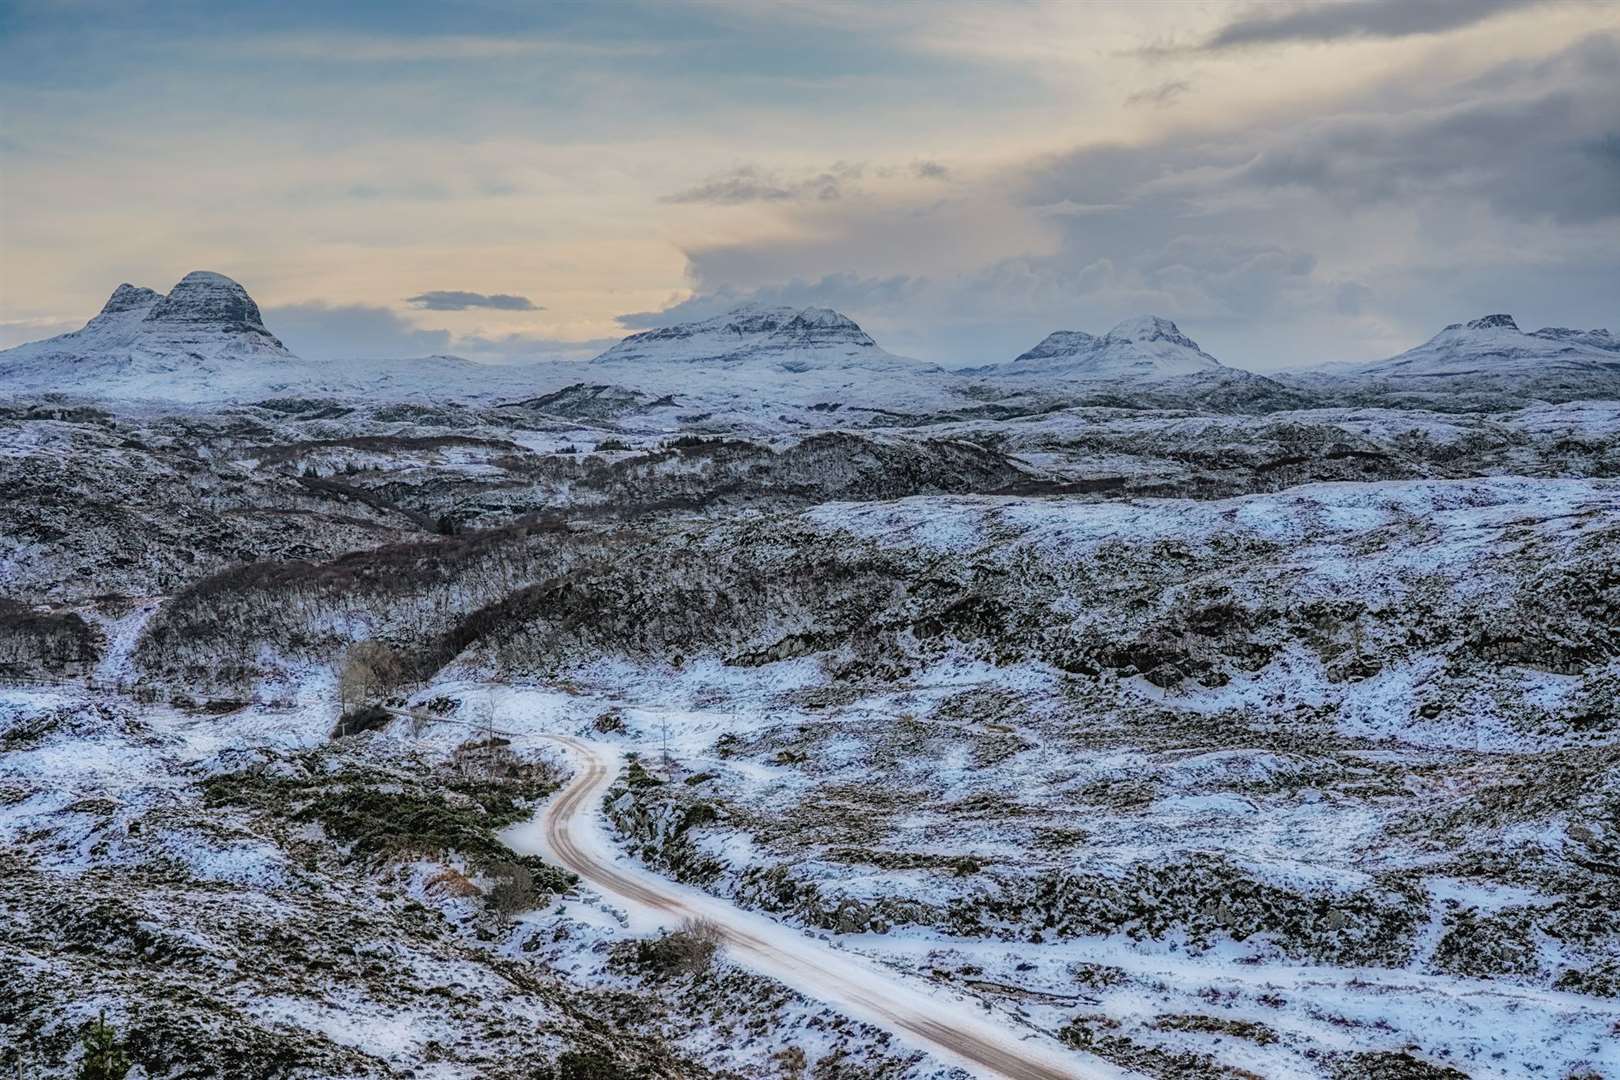 A view of Assynt and Coigach from the B869 viewpoint. Photo: Chris Puddephatt